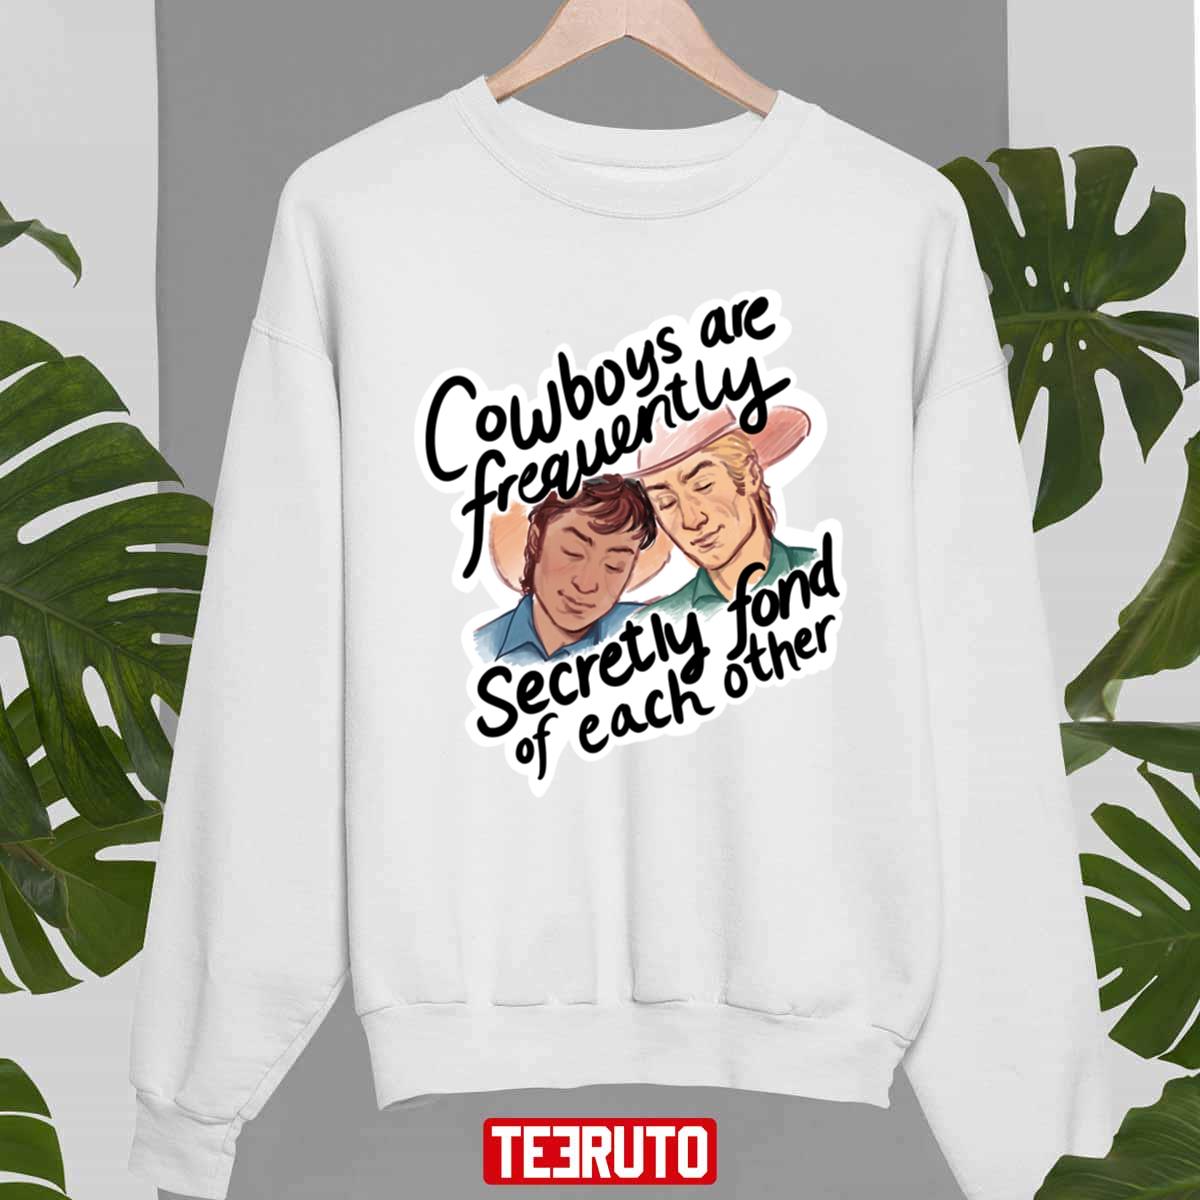 Cowboys Are Frequently Secretly Fond Of Each Other Funny Unisex Sweatshirt